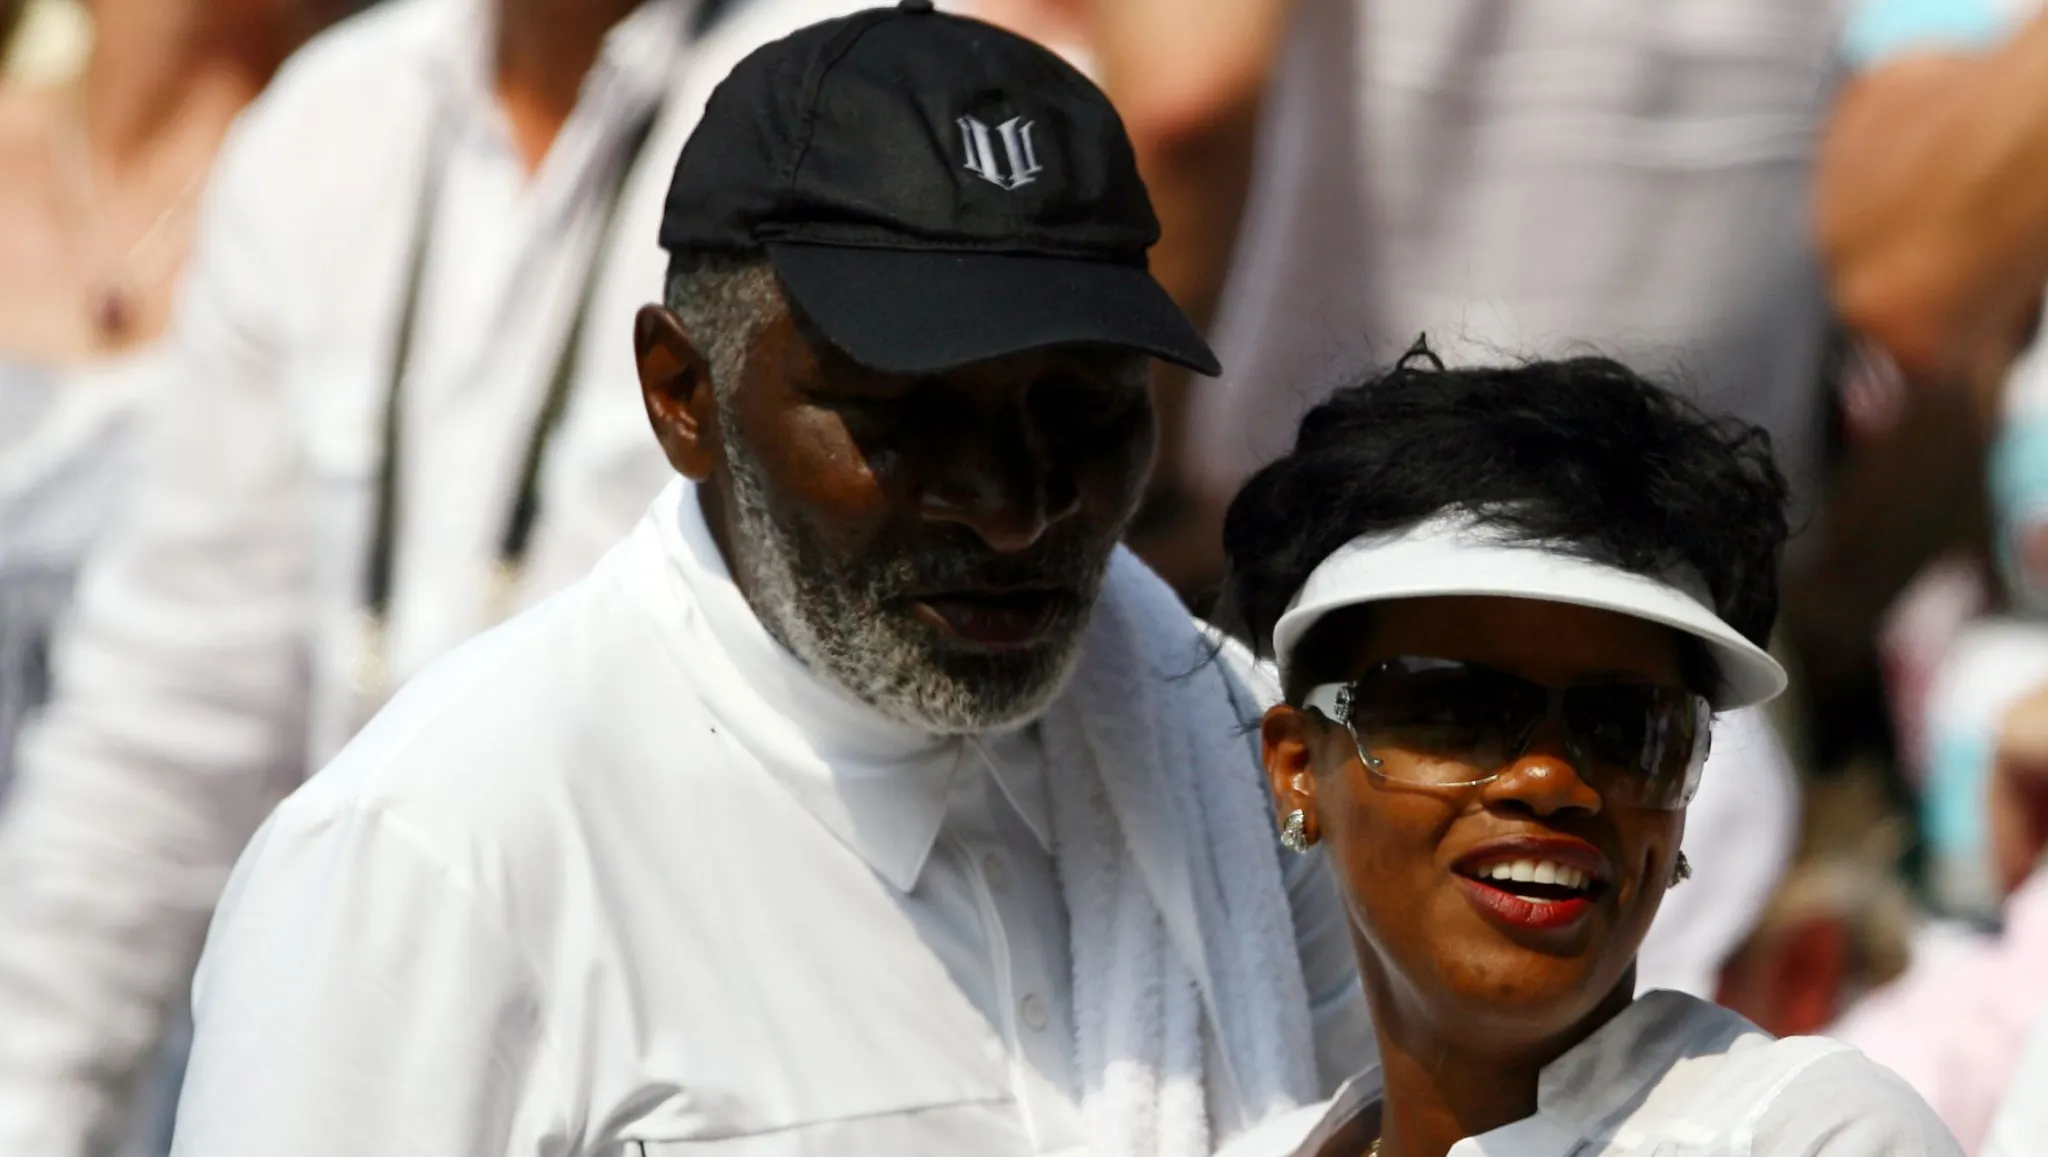 Say What Now? Serena and Venus Williams’ Dad Richard, 81, Is Reportedly Taking Care of Son, 11, ‘Full-time’ as Estranged Wife Allegedly ‘Begs Him’ for More Money